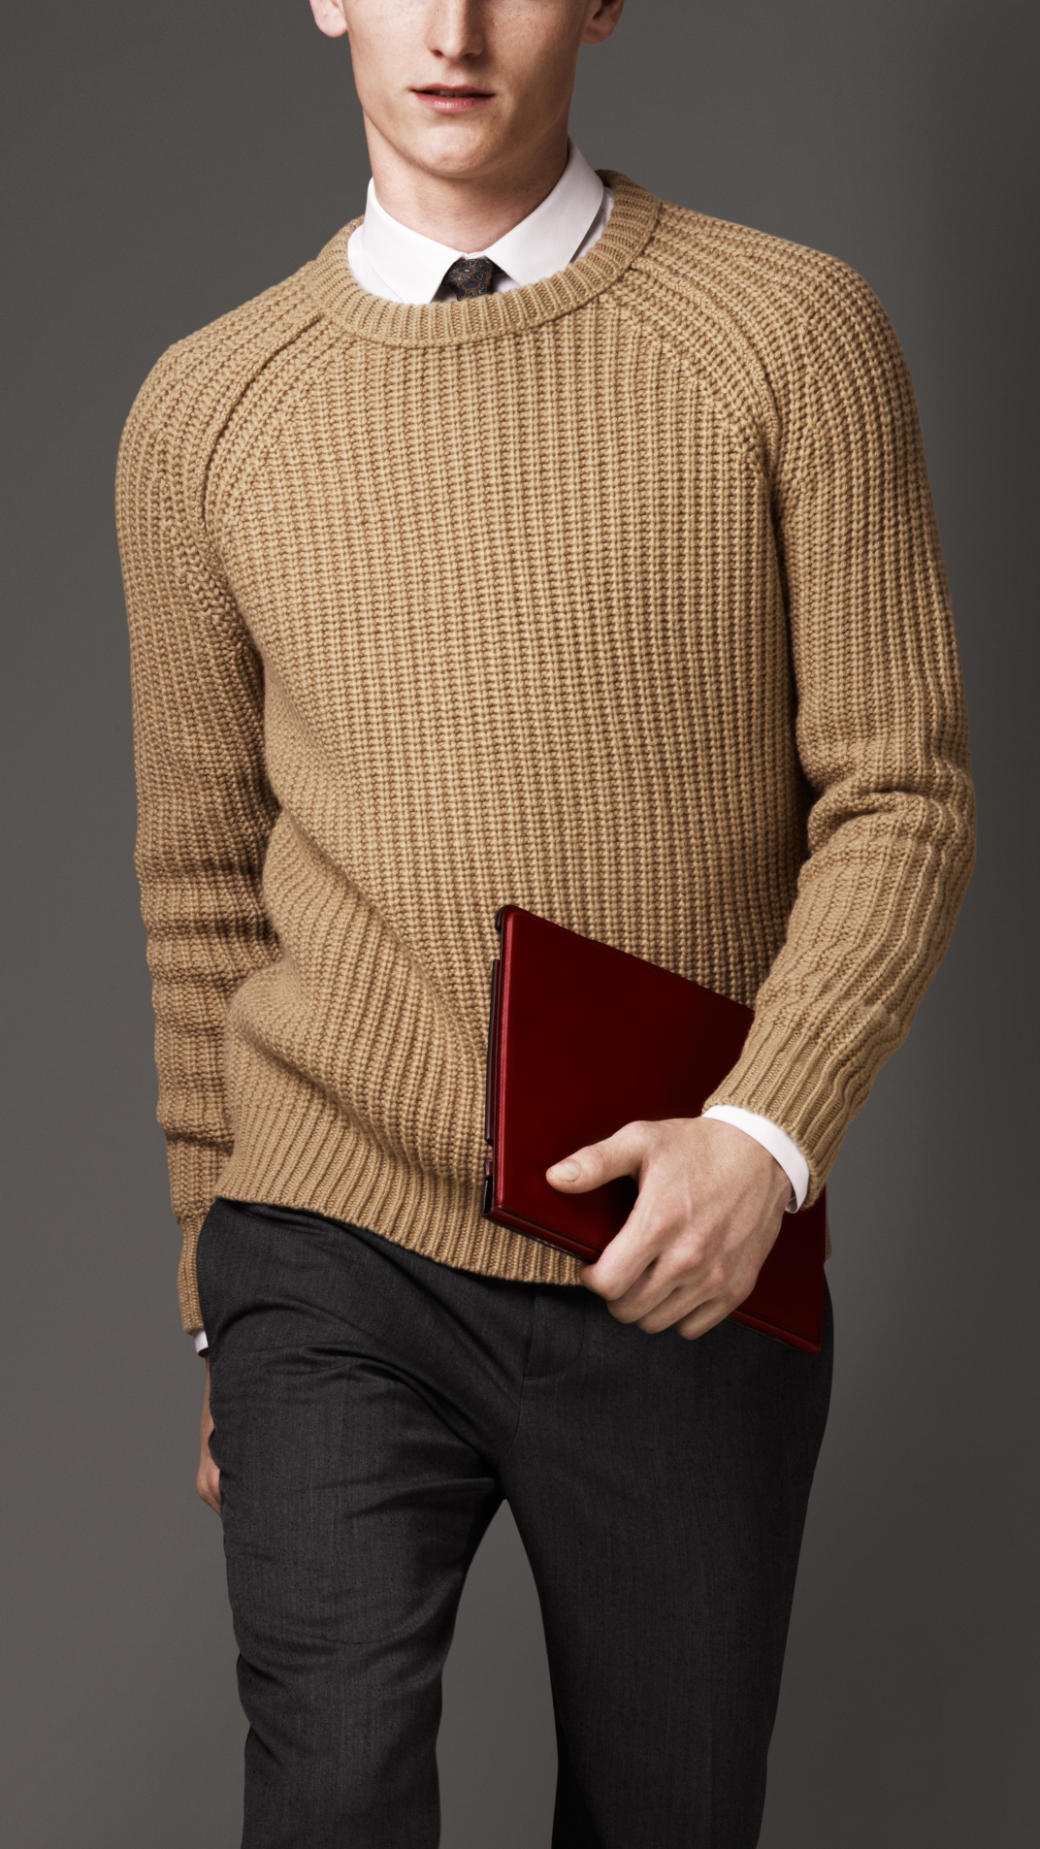 Burberry Ribbed Wool Cashmere Sweater in Camel (Natural) for Men - Lyst